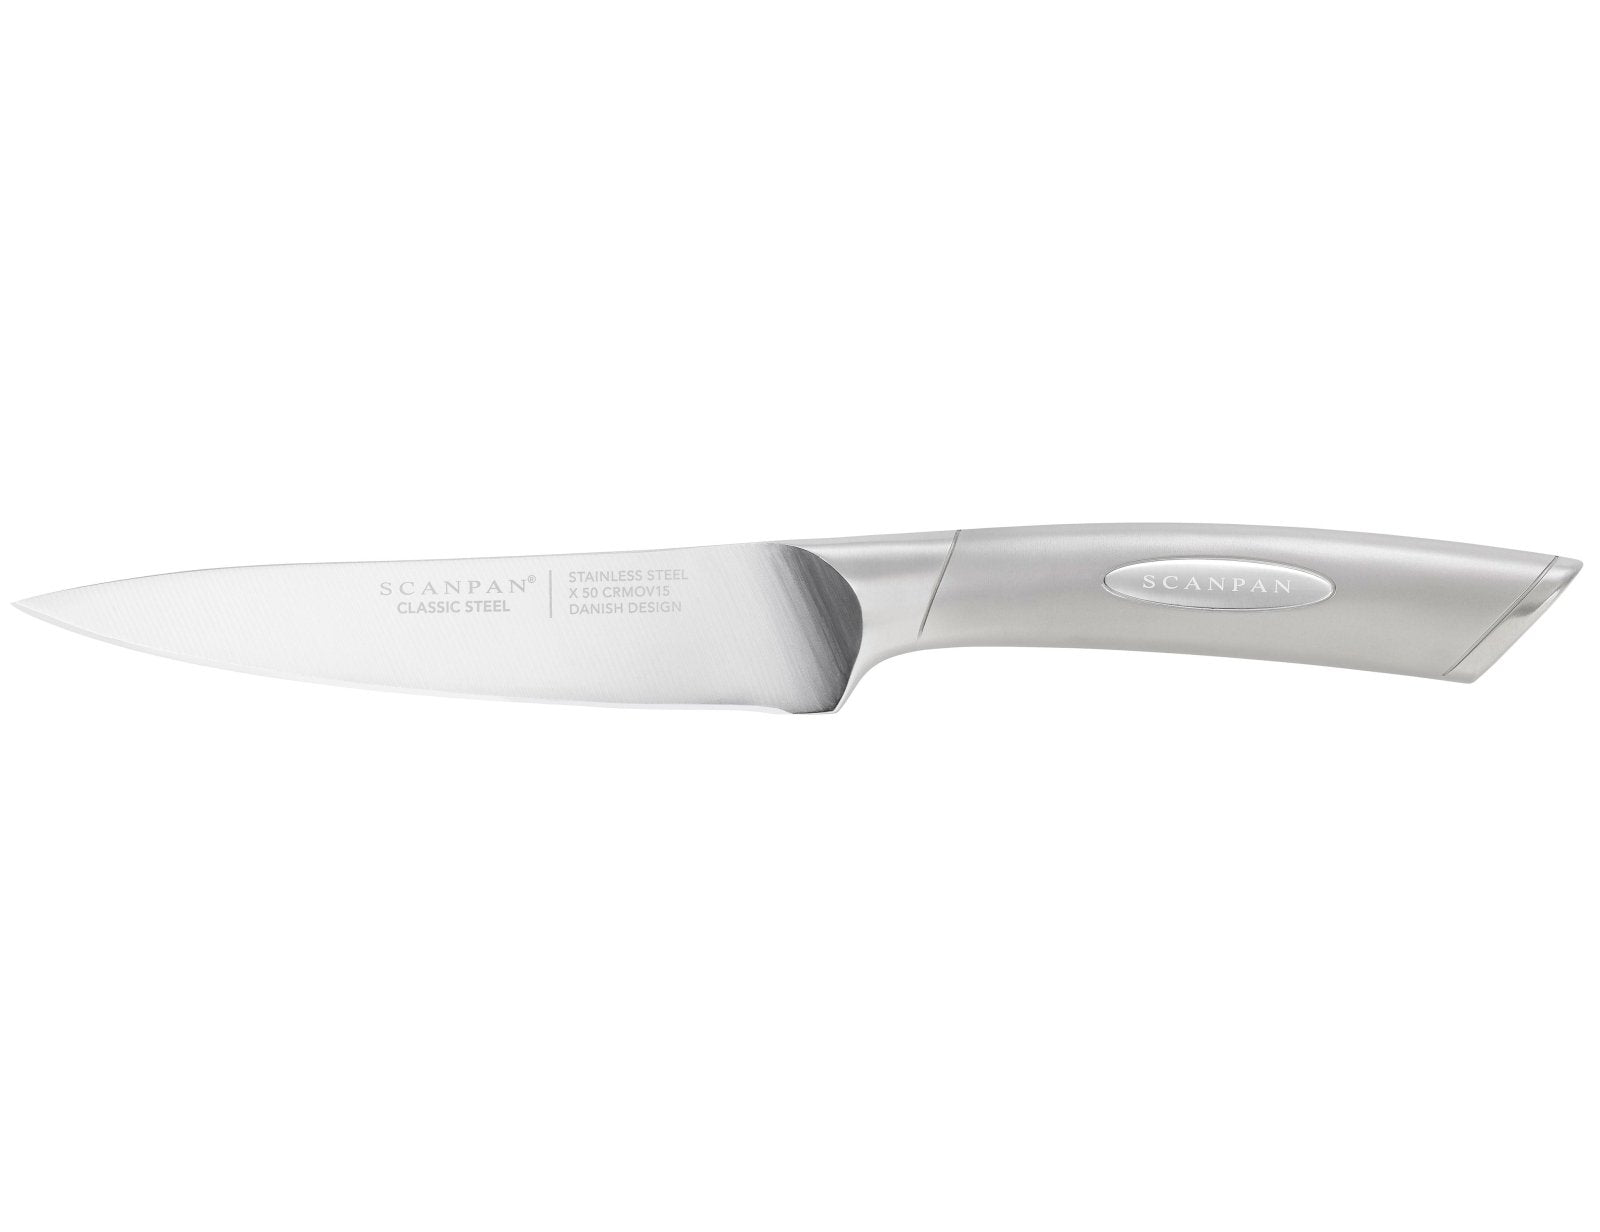 Scanpan Classic Steel 15cm Utility Knife - SP9001201500 - The Cotswold Knife Company